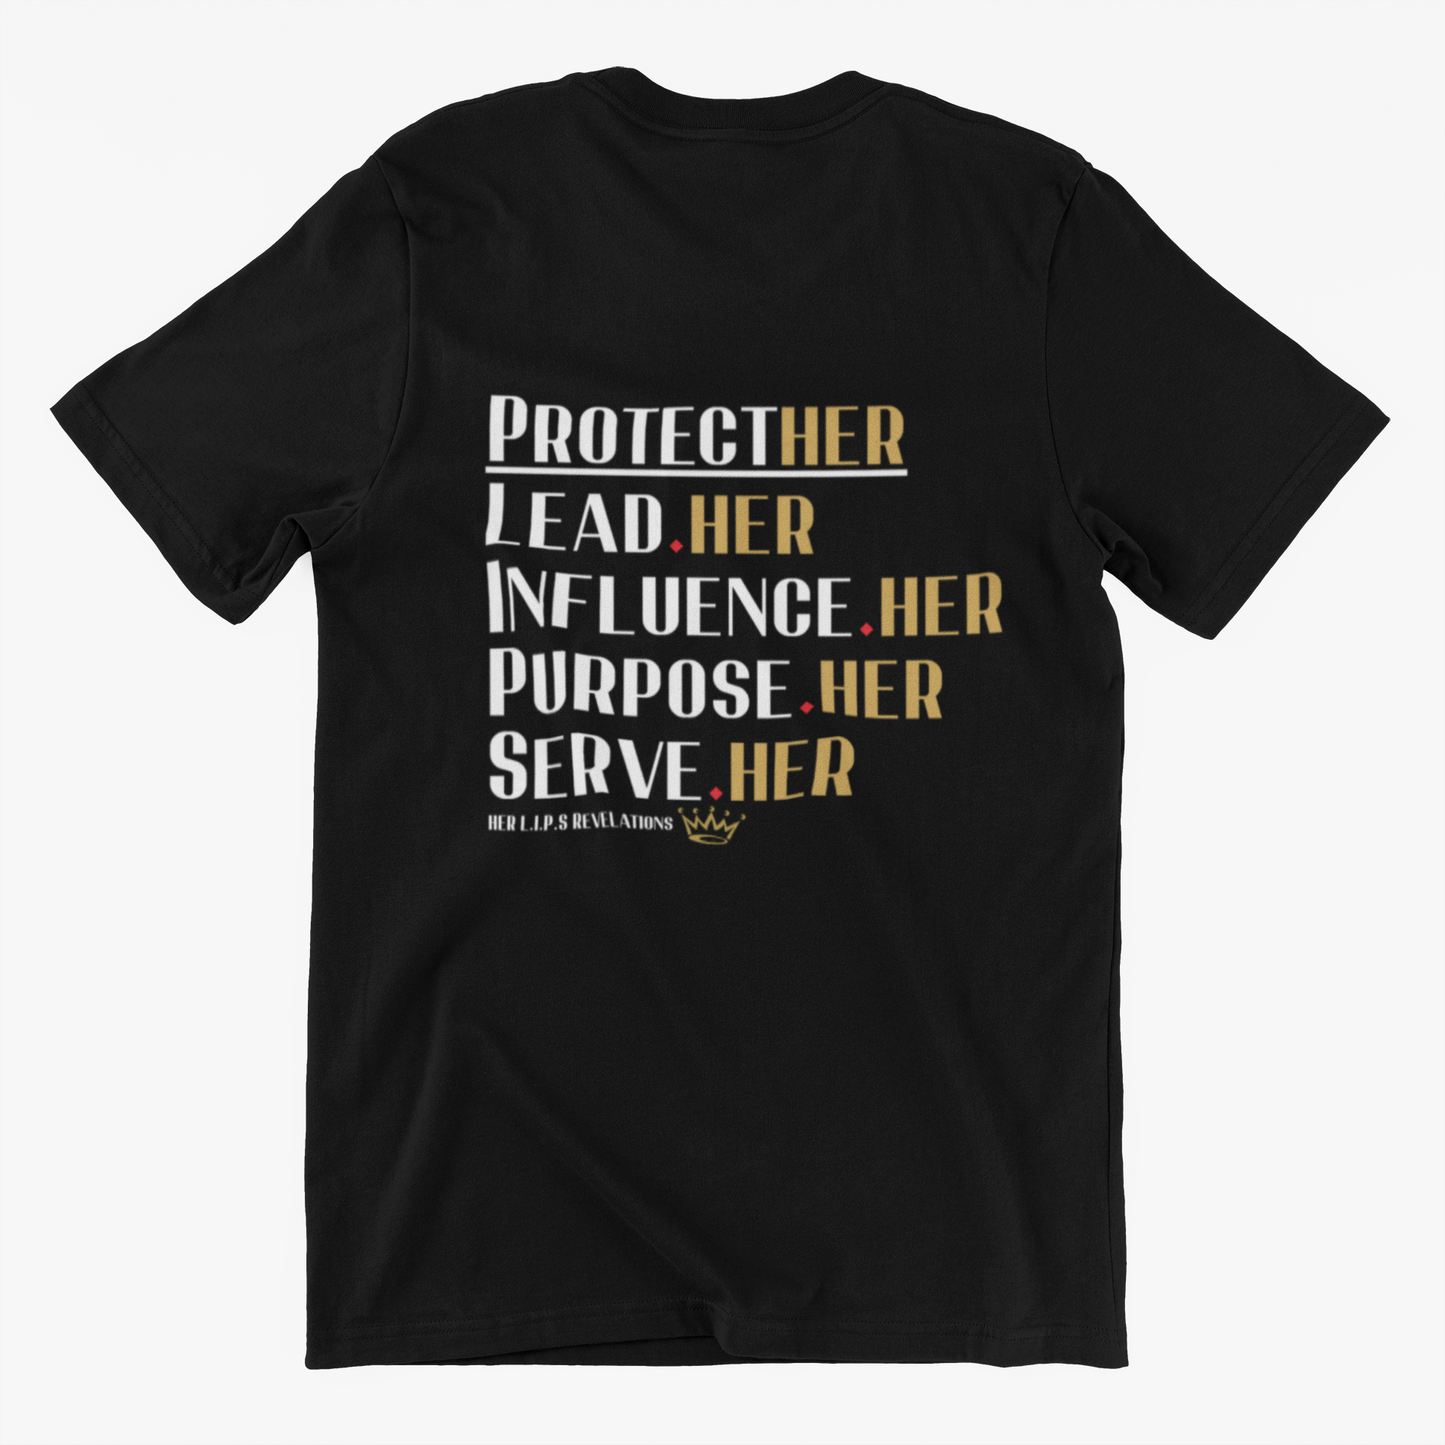 ProtectHER Tee